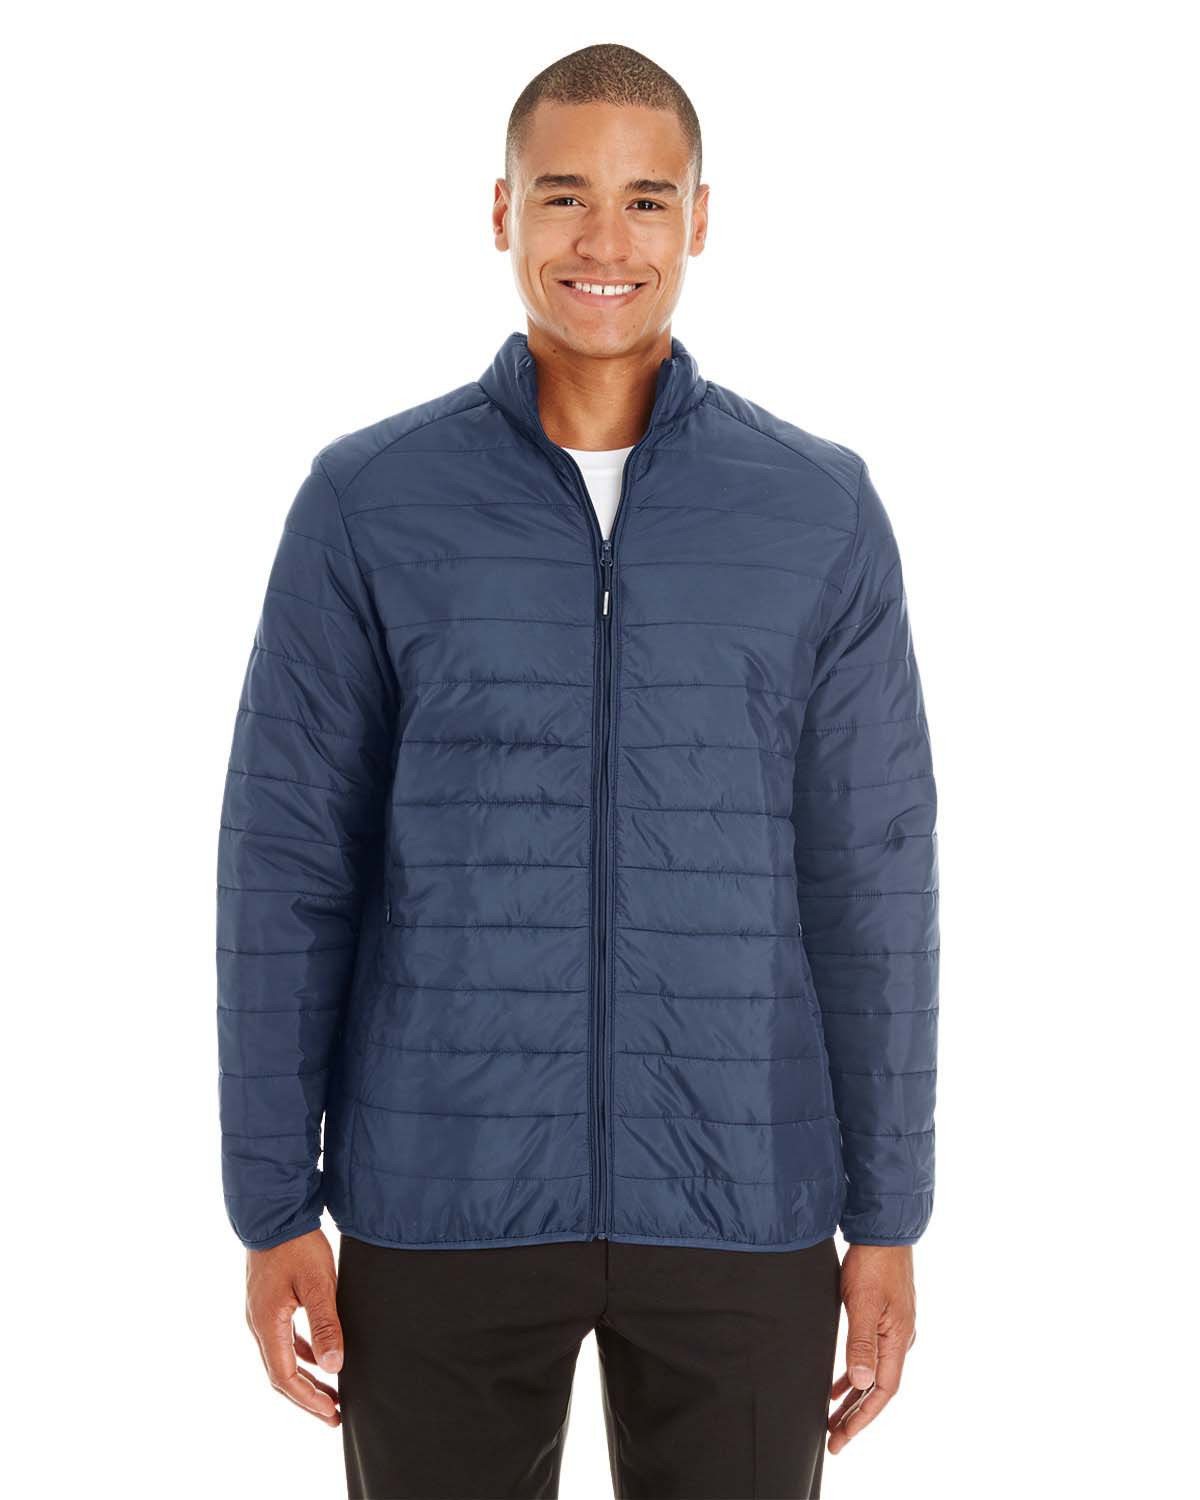 Core 365 CE700T Men's Tall Prevail Packable Puffer Jacket 